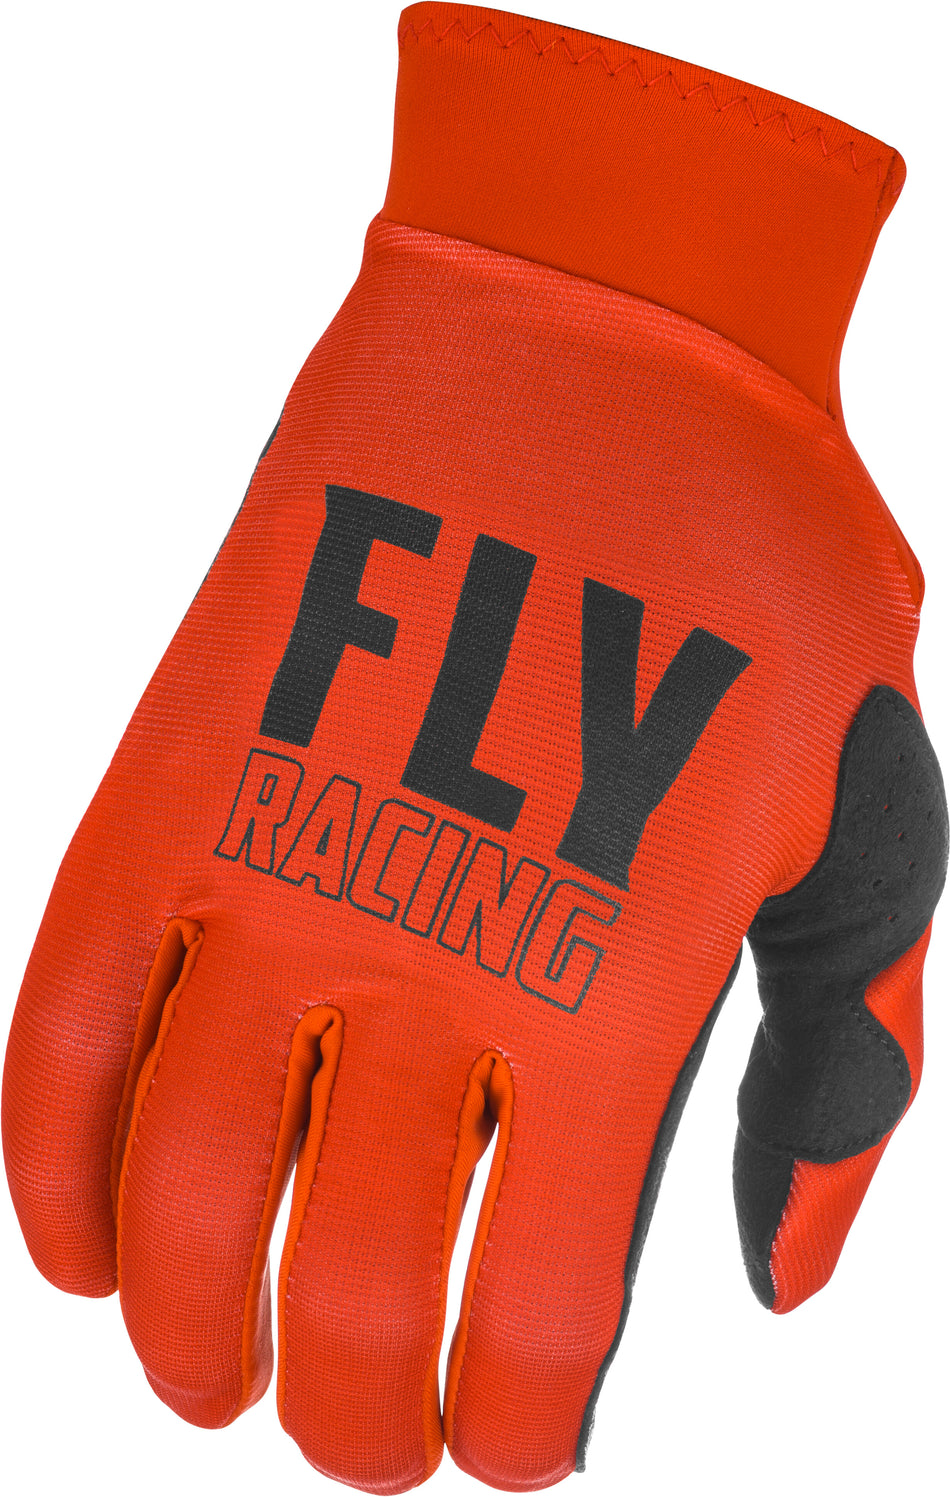 FLY RACING Pro Lite Gloves Red/Black Sz 10 374-85210